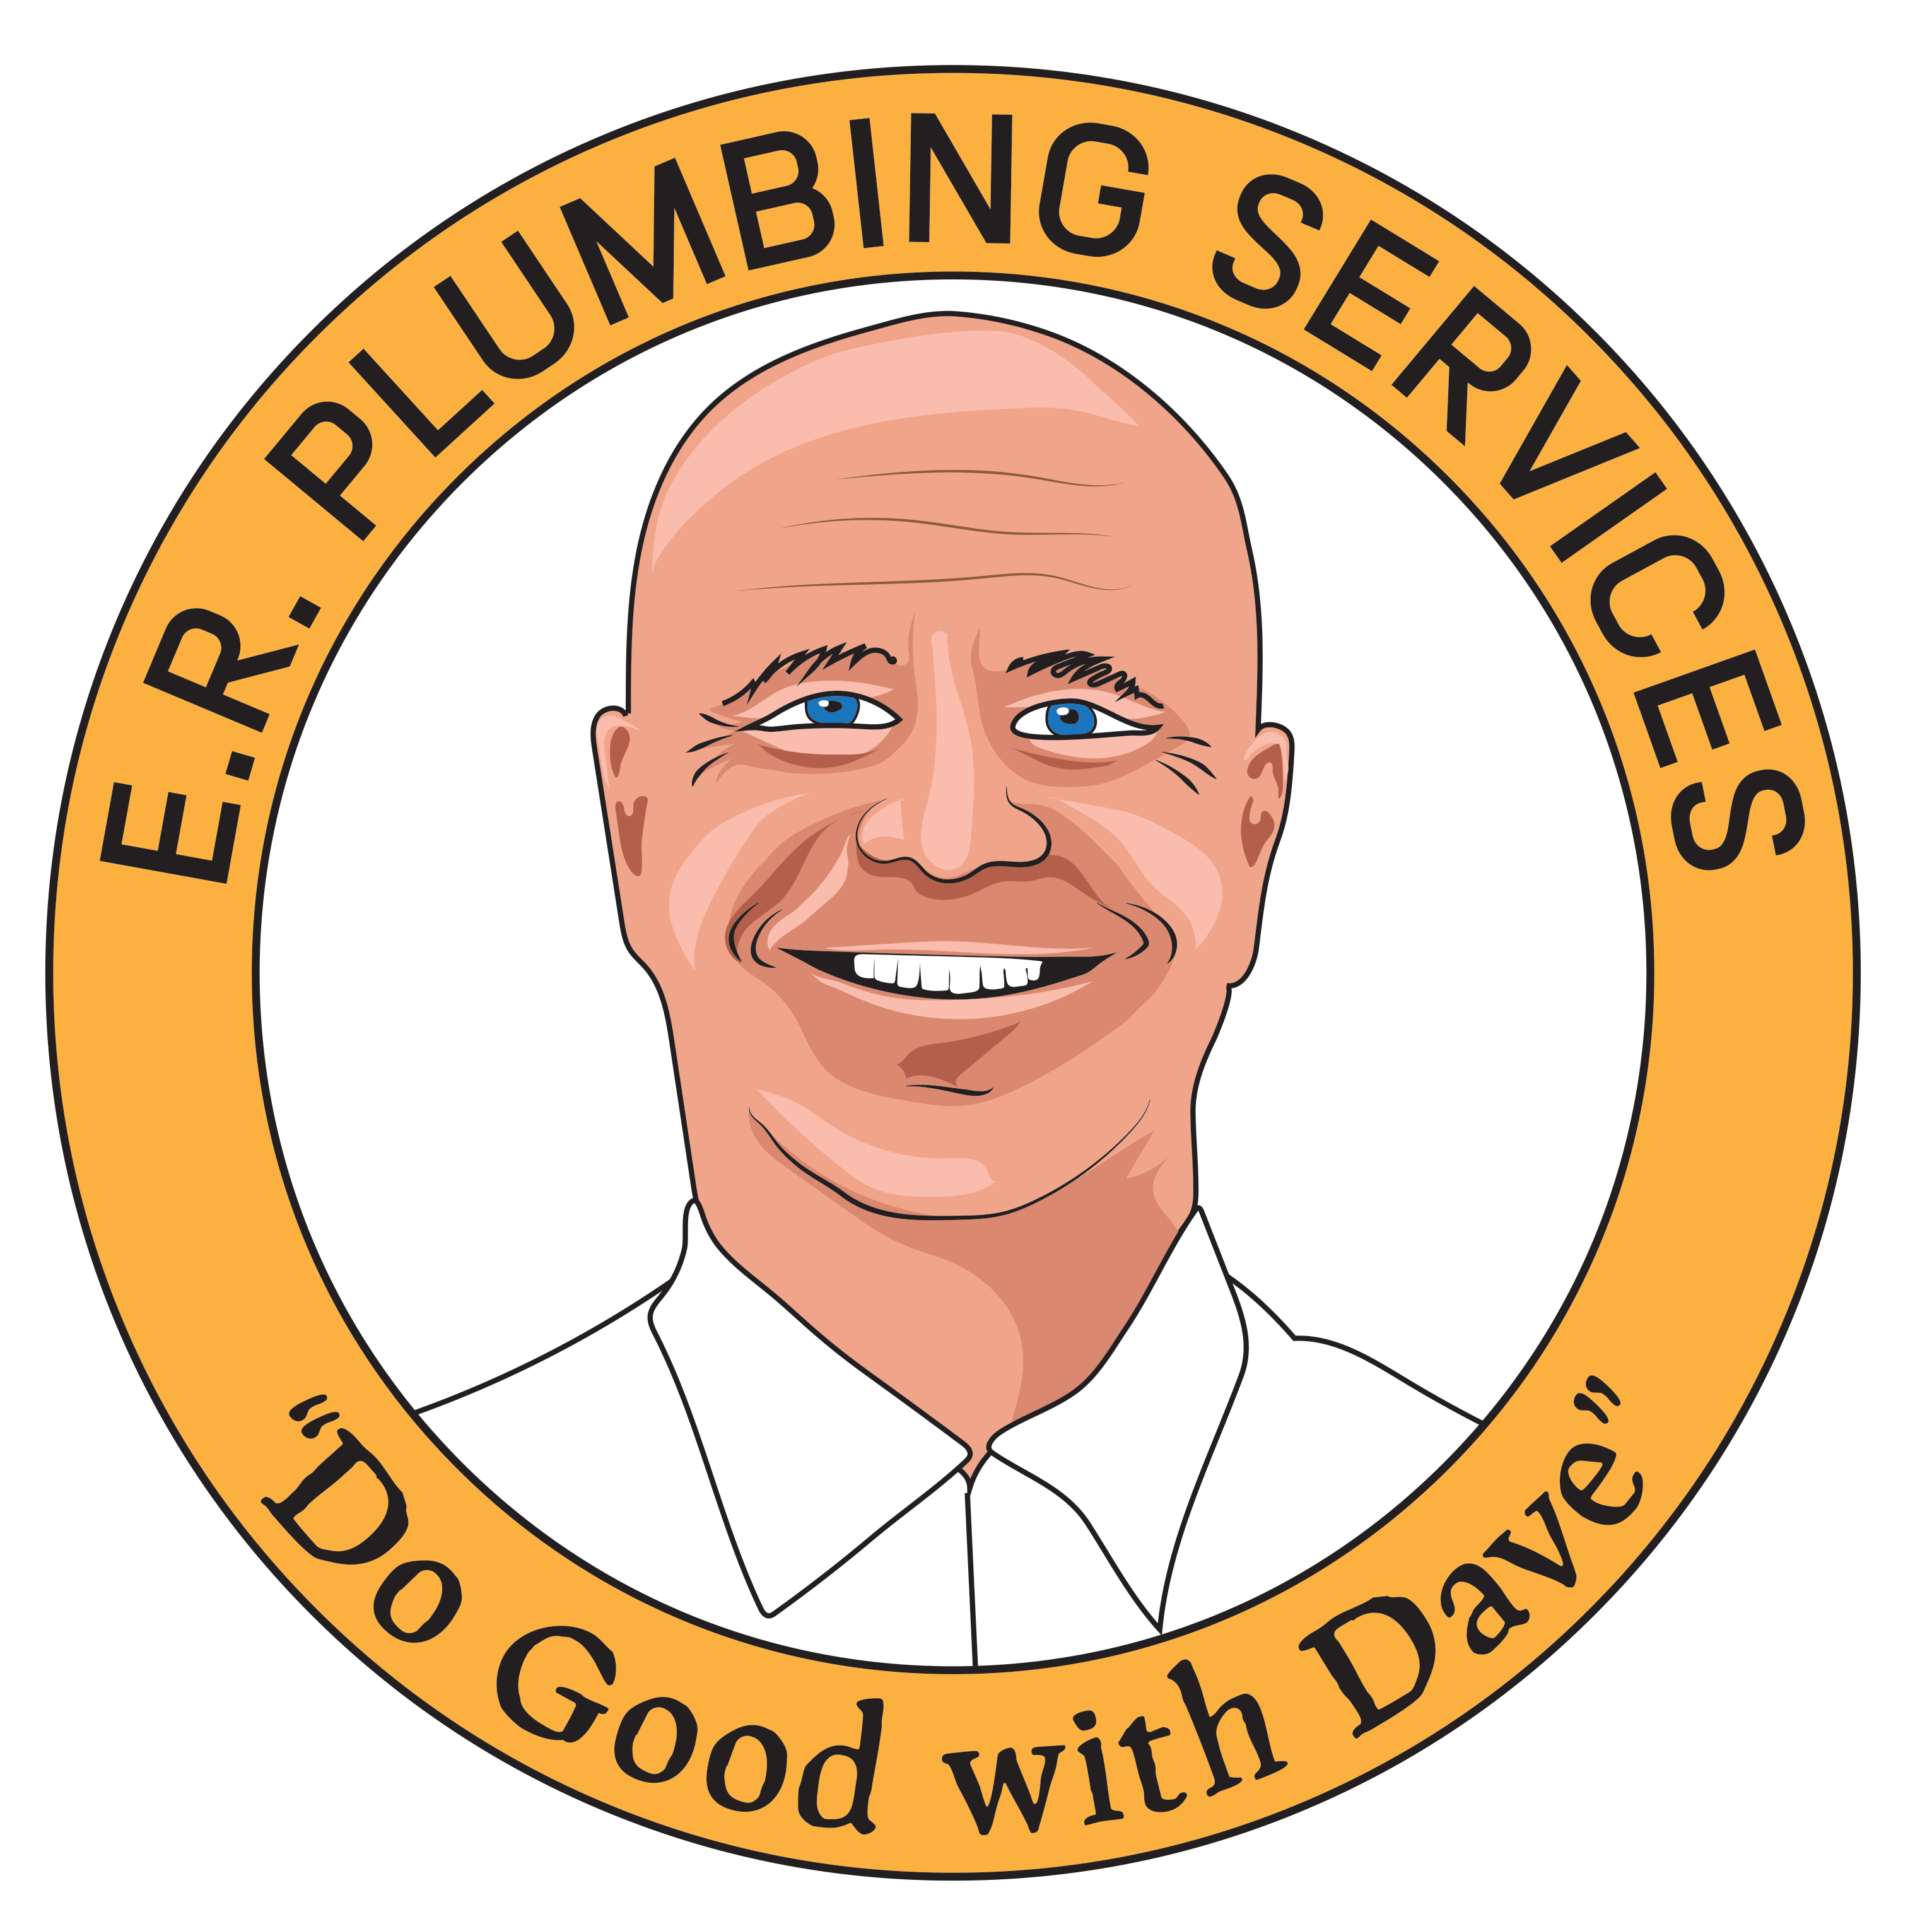 David Parker, Owner of E.R. Services and Charlotte Master Plumber